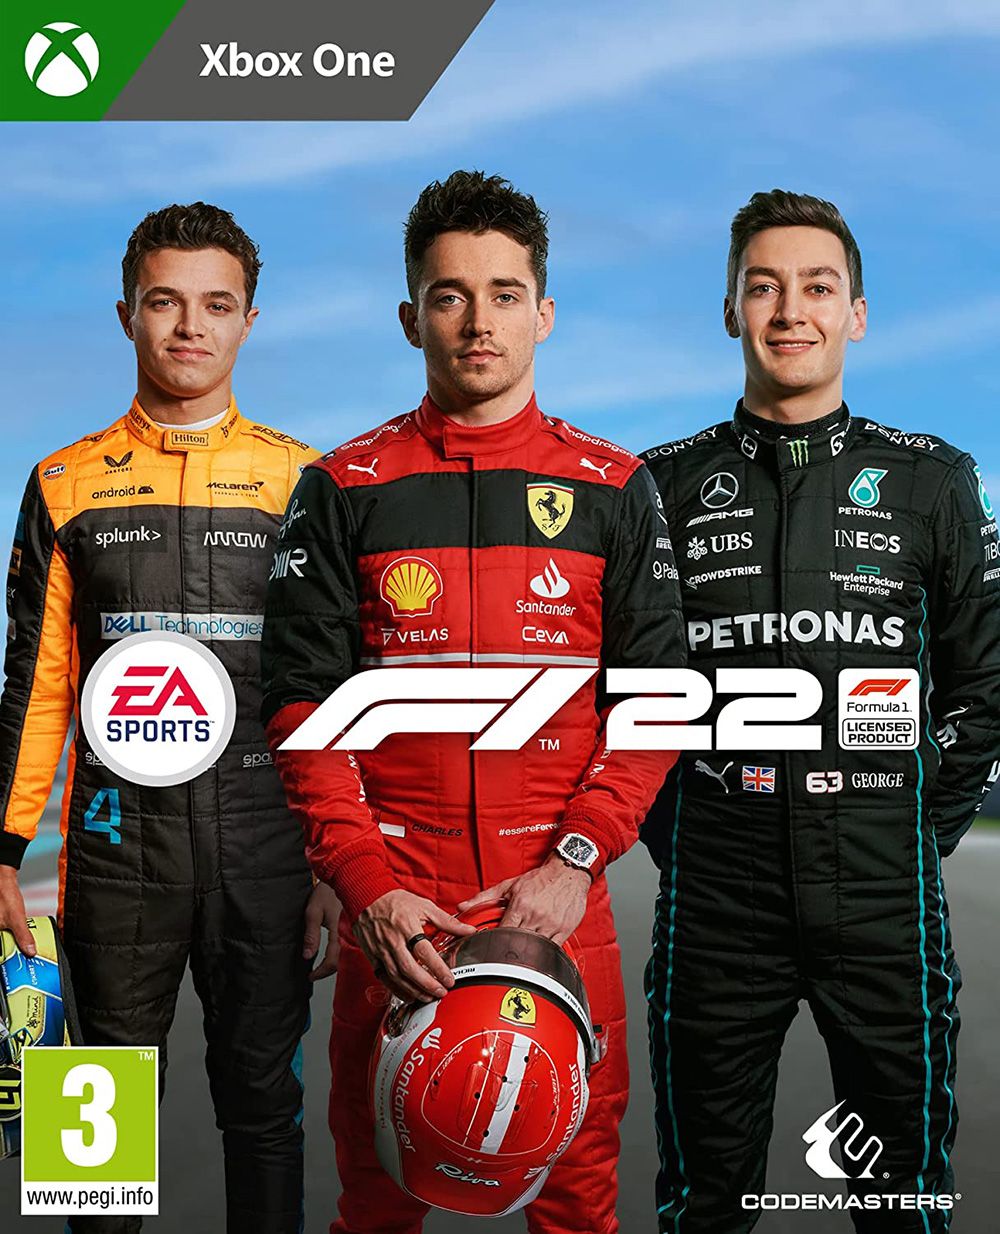 F1 2022 (Xbox One)(New) Buy from Pwned Games with confidence. Xbox